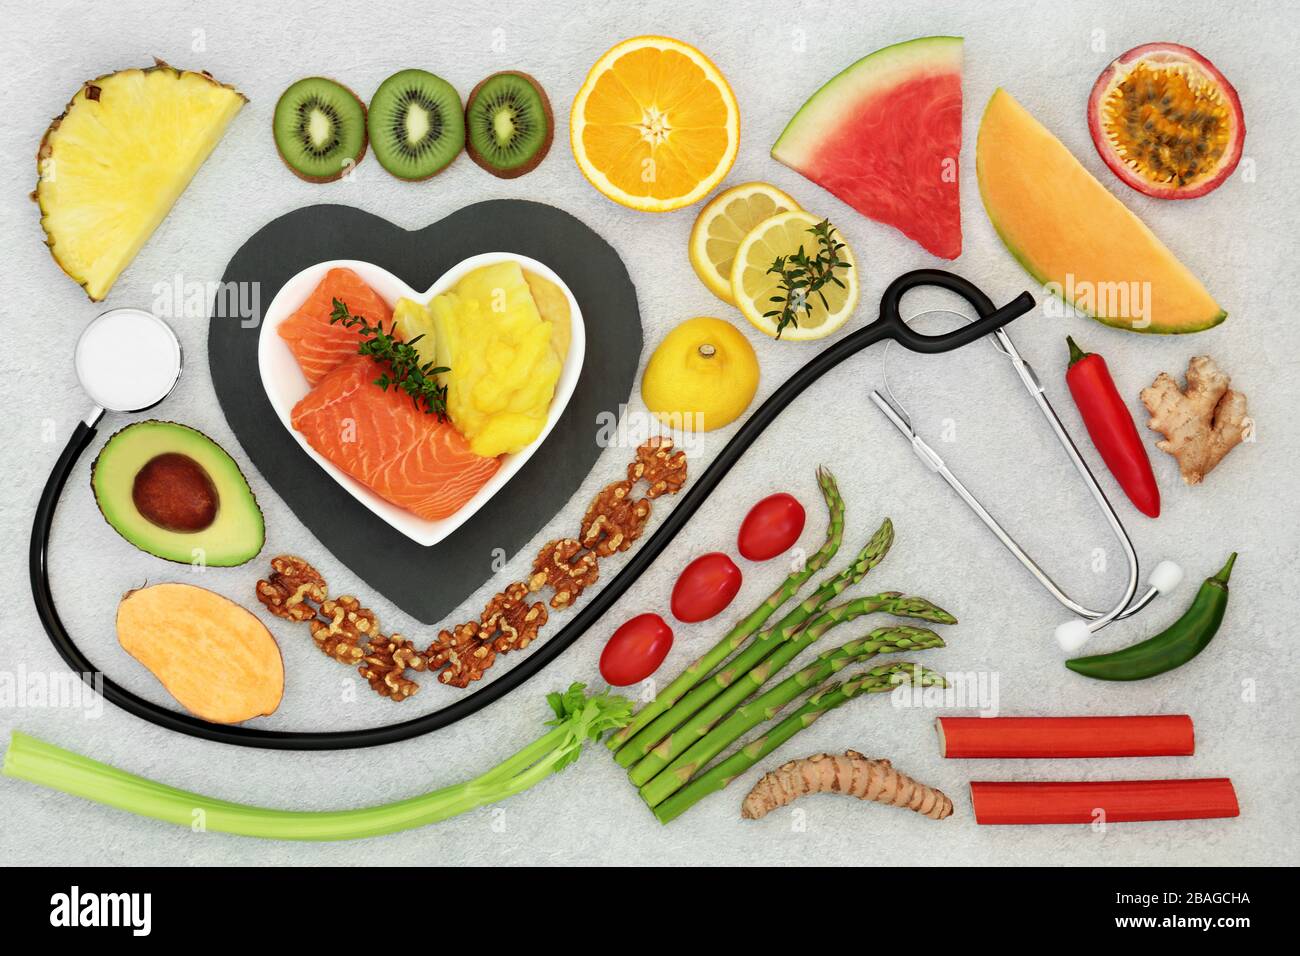 Health food for a healthy heart & cardiovascular system with stethoscope, fruit, vegetables, seafood,  herbs, spice &  nuts. Stock Photo